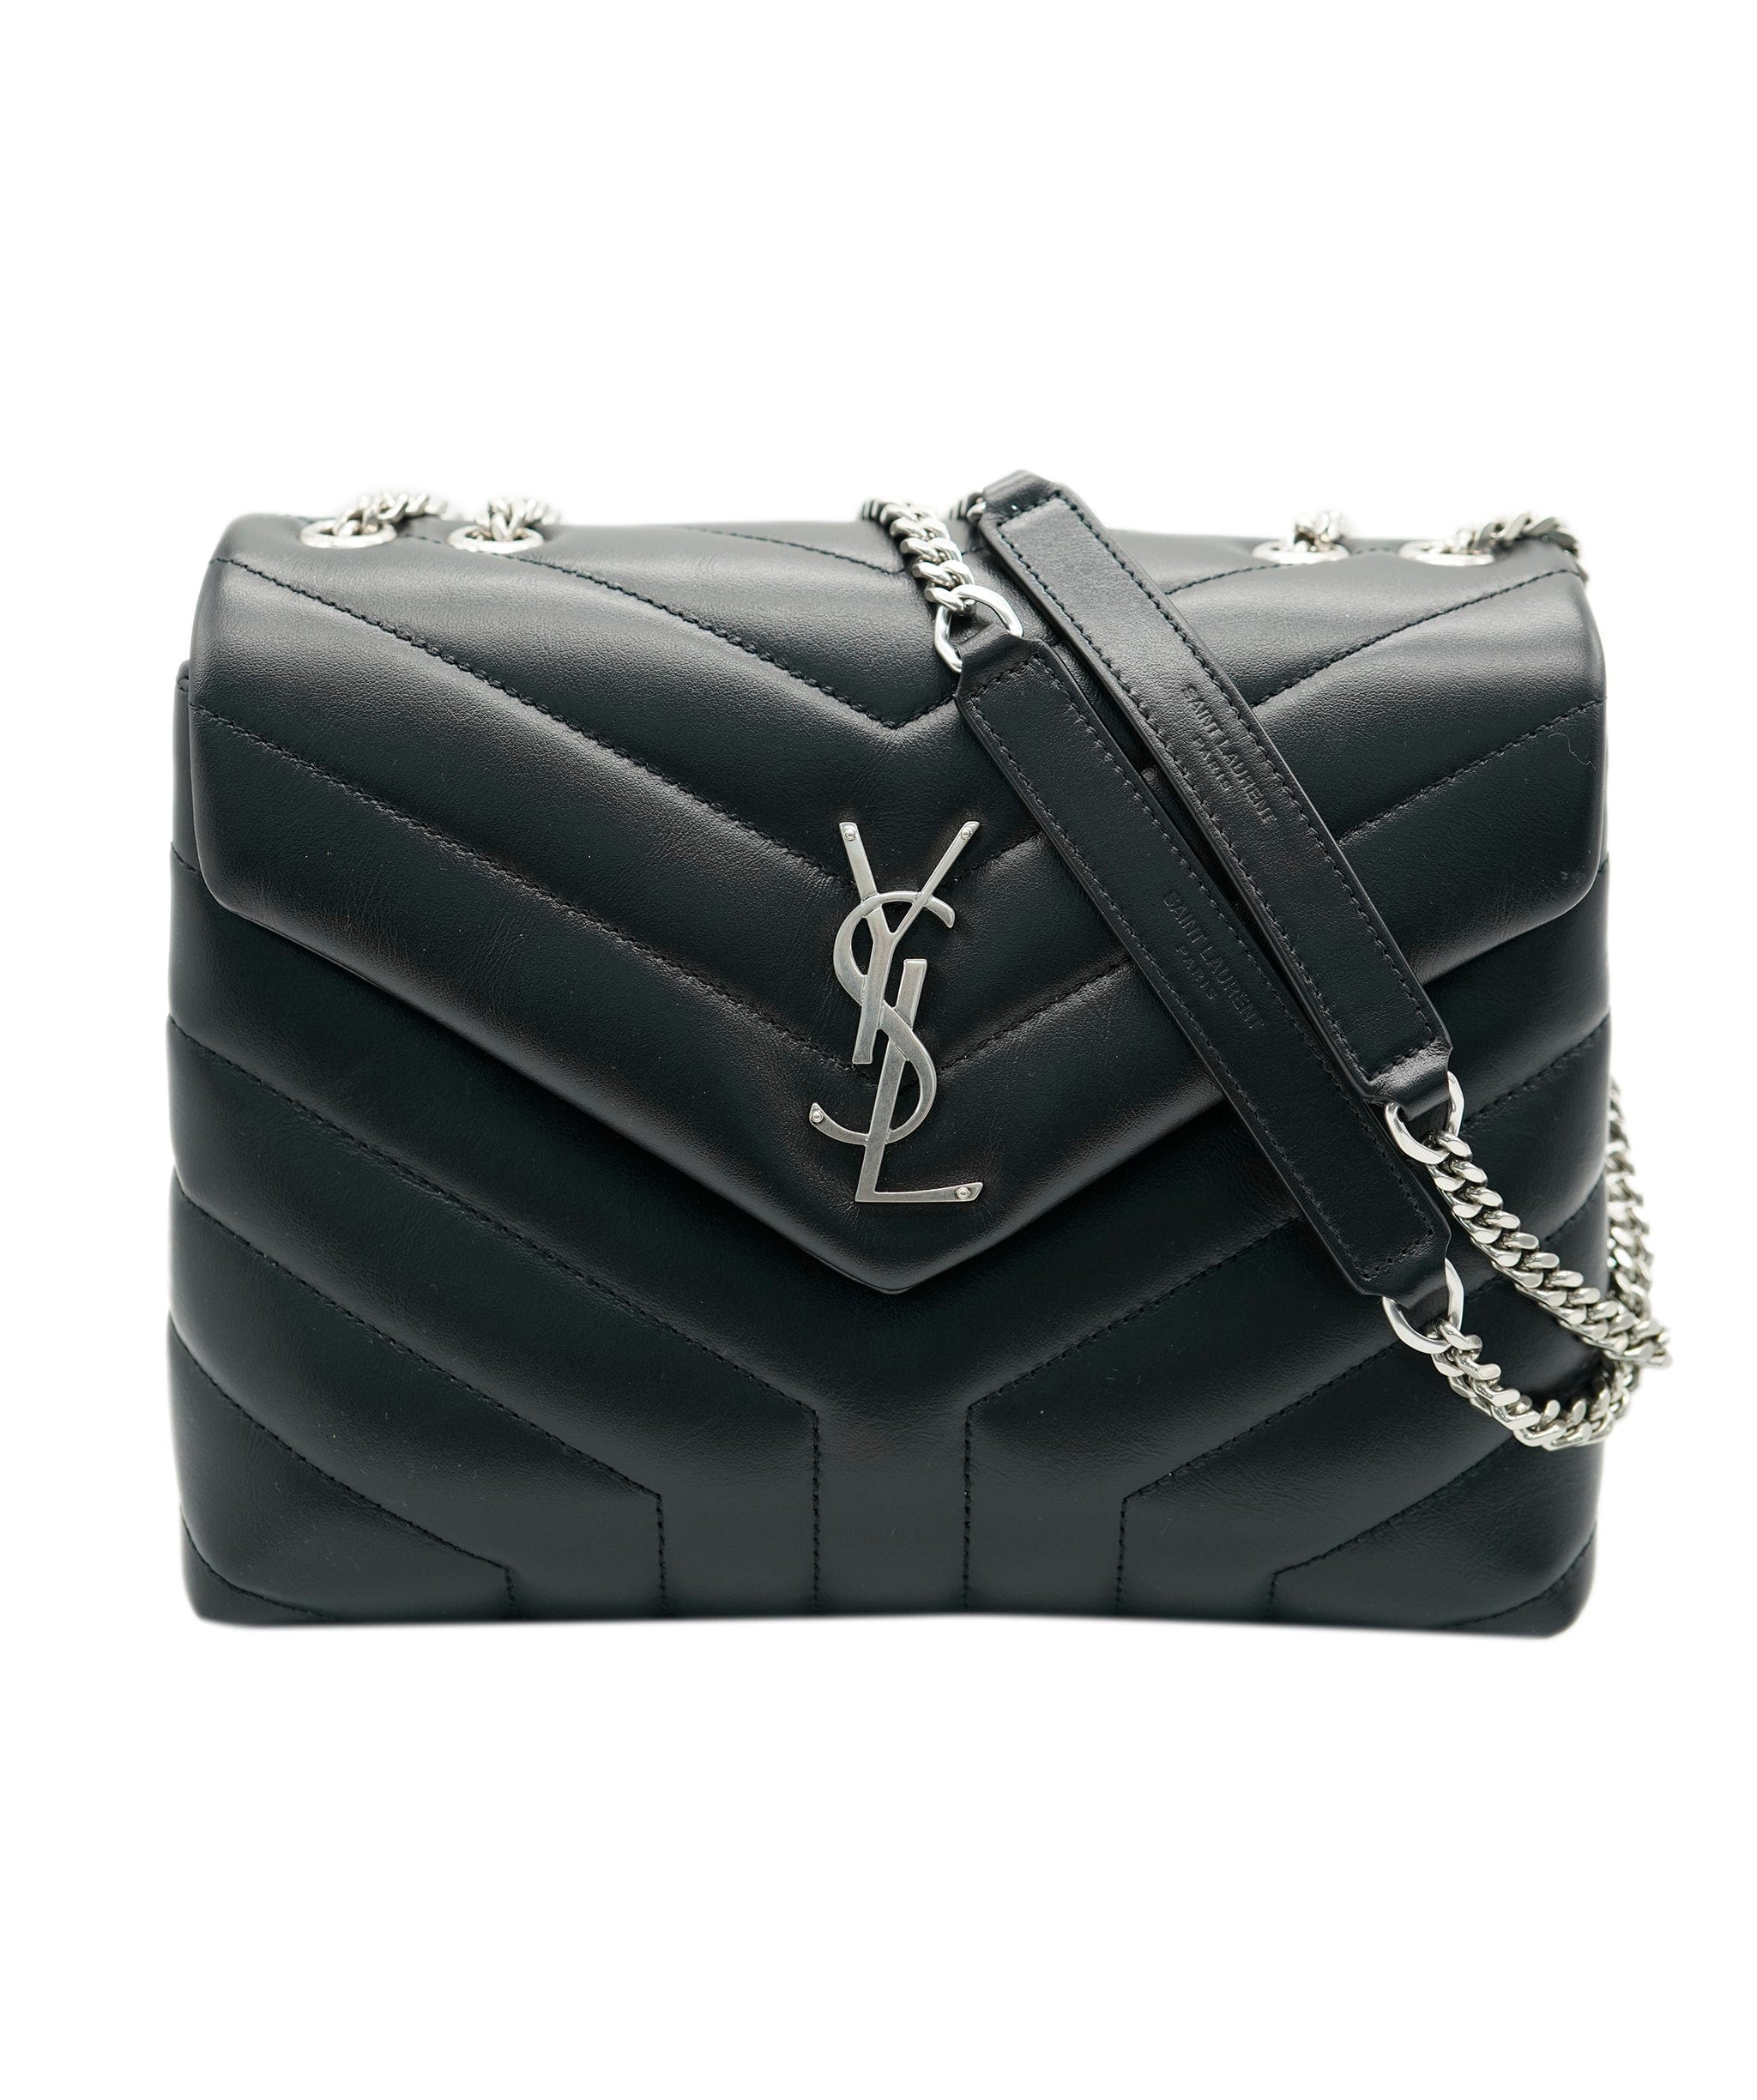 Saint Laurent Black Quilted Leather Small Loulou Bag ASC2086